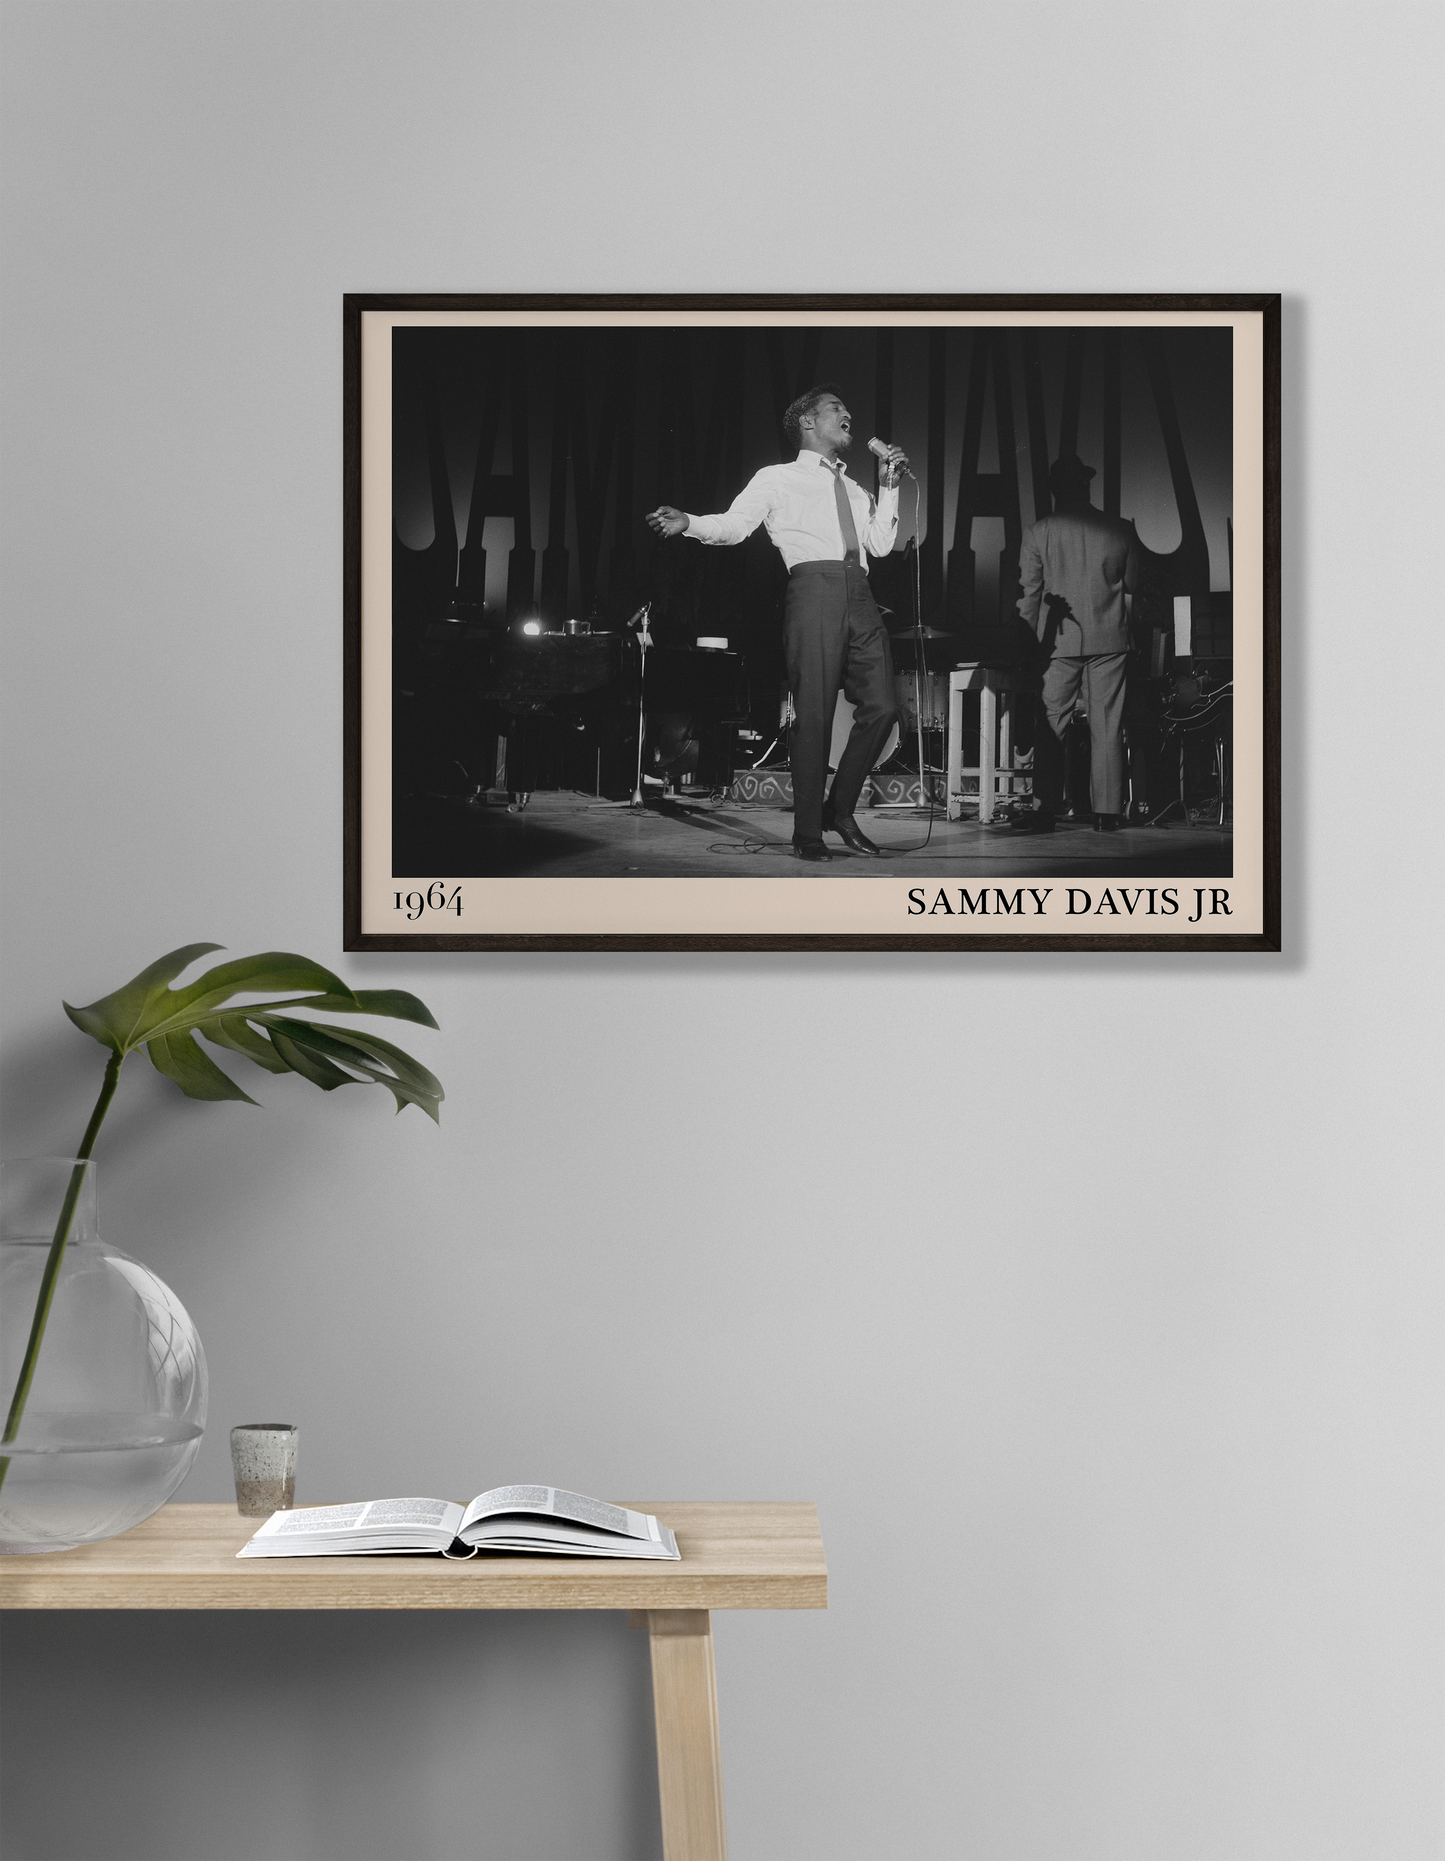 1964 picture of Sammy Davis Jr singing. Picture crafted into a cool black framed jazz print, with an off-white border. Poster is hanging on a grey living room wall